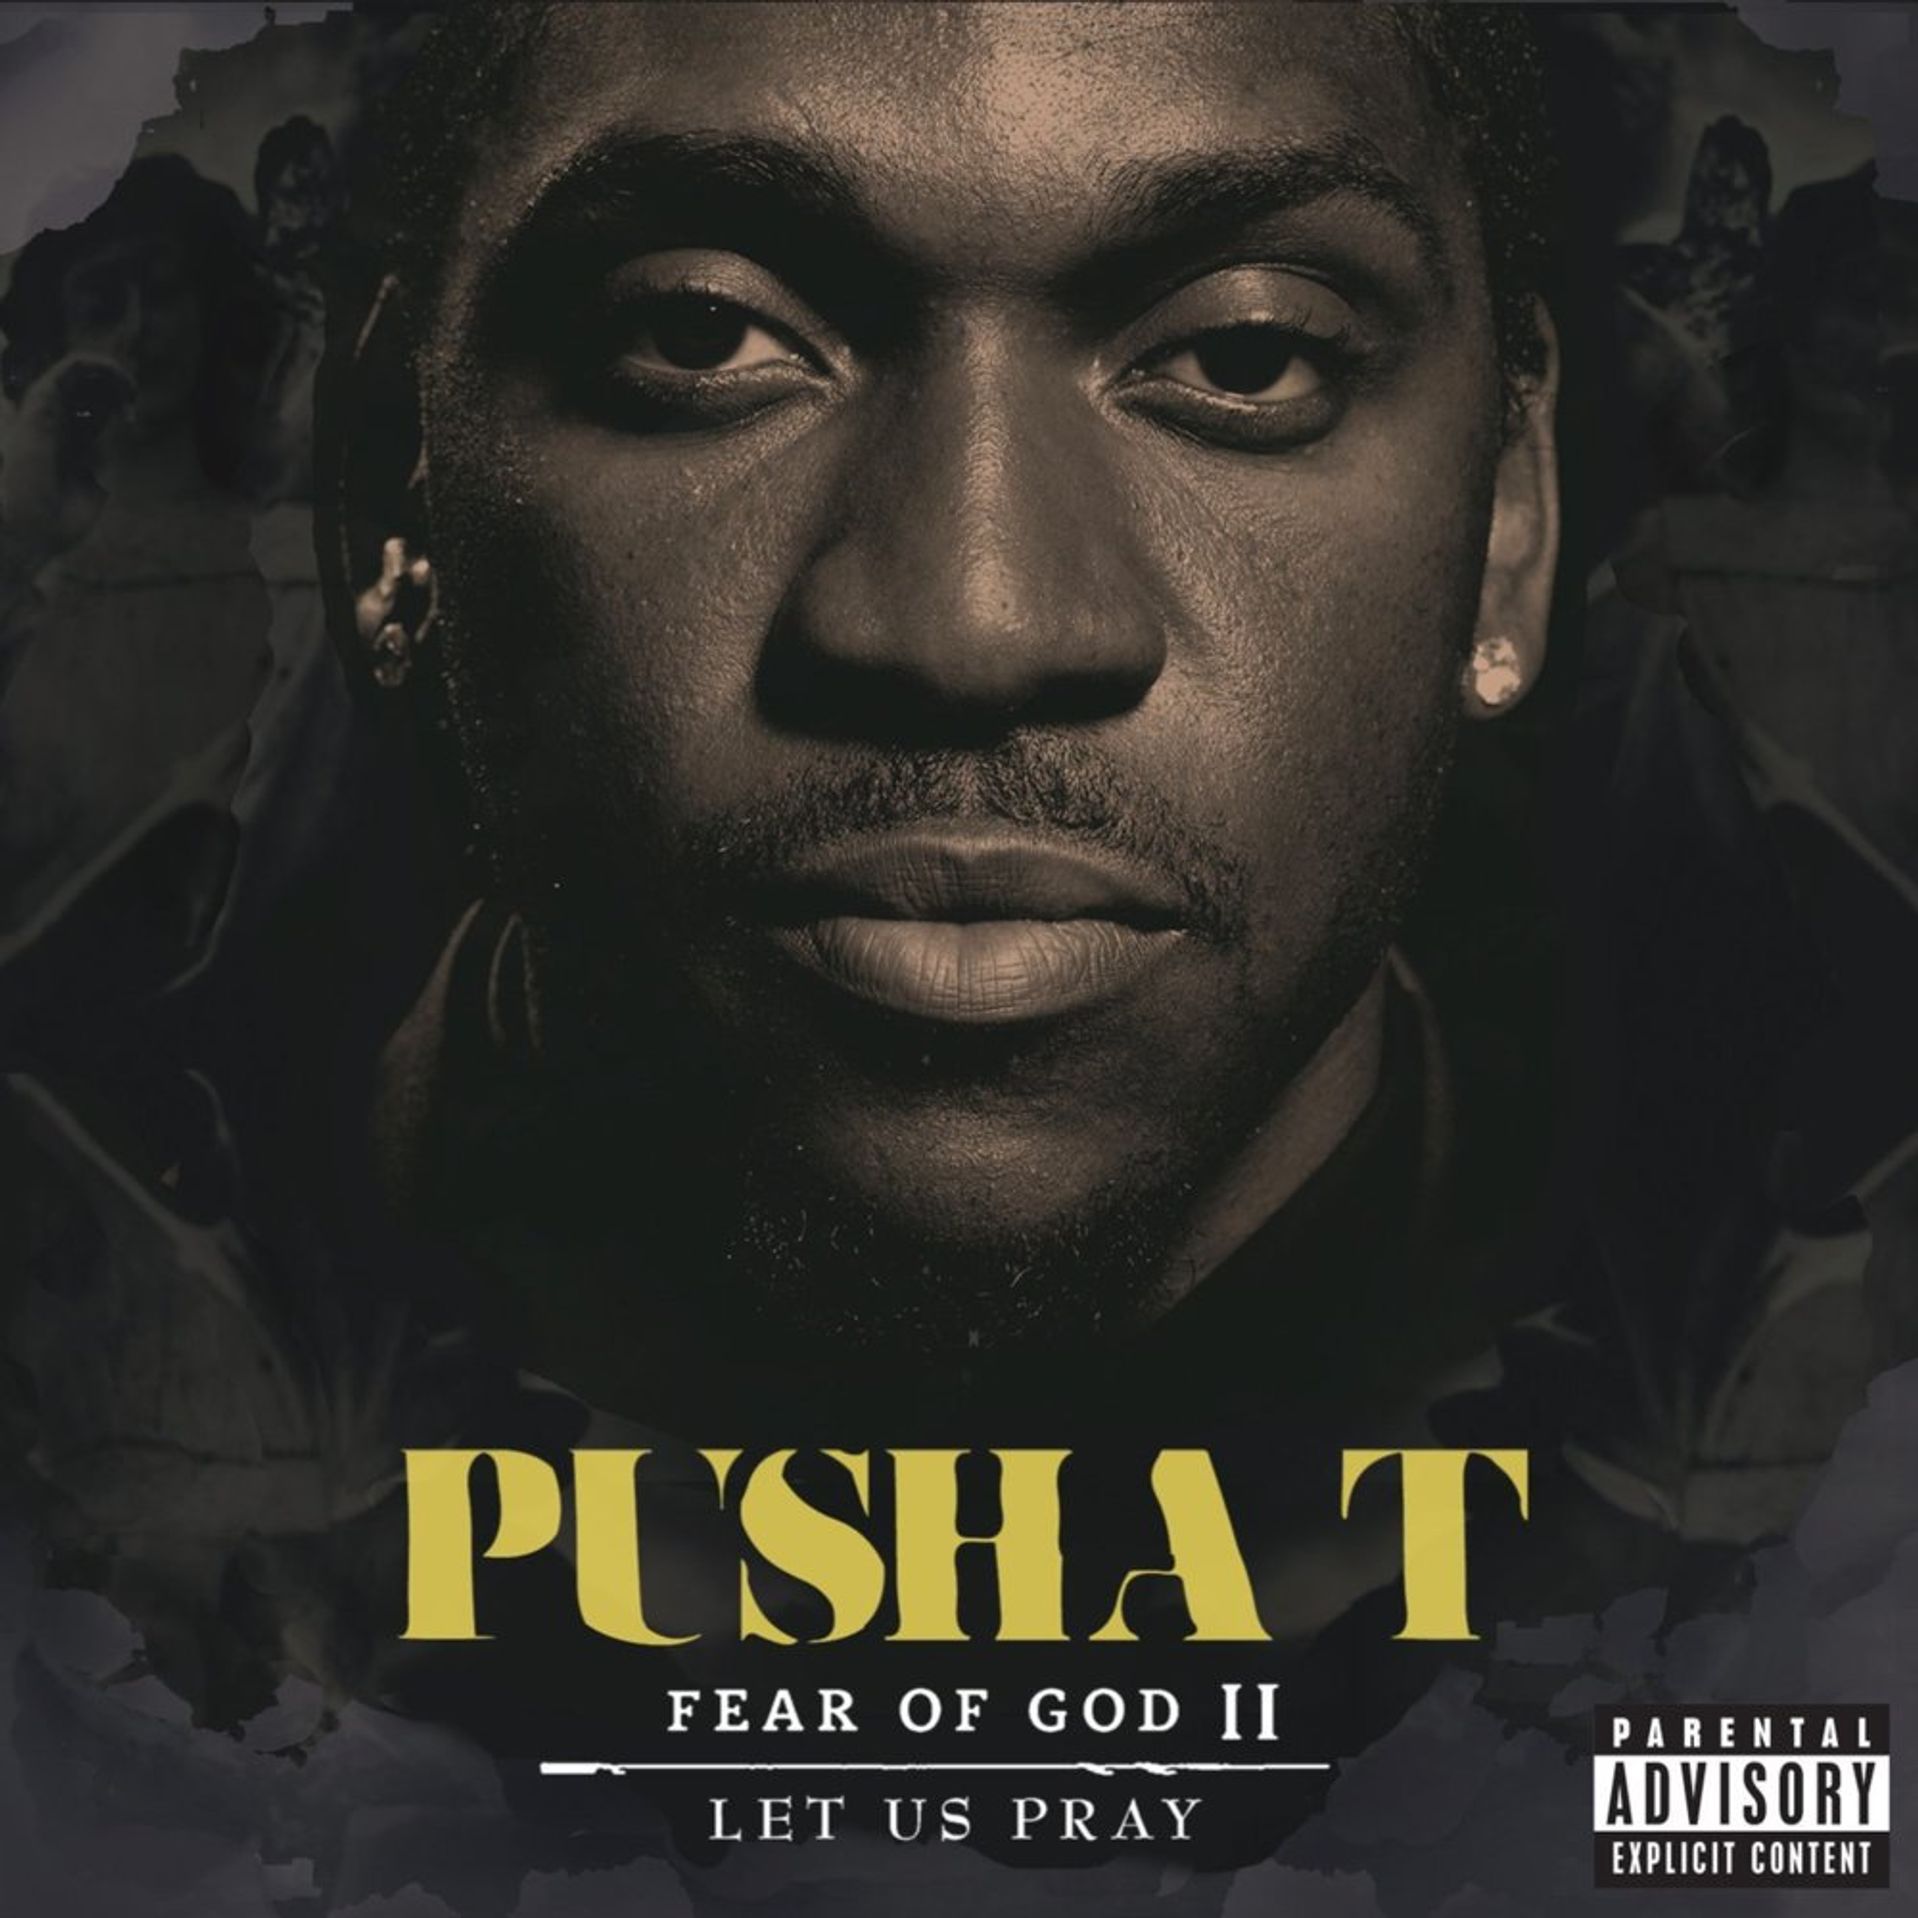 Album Title: Fear of God II: Let Us Pray by: Pusha T